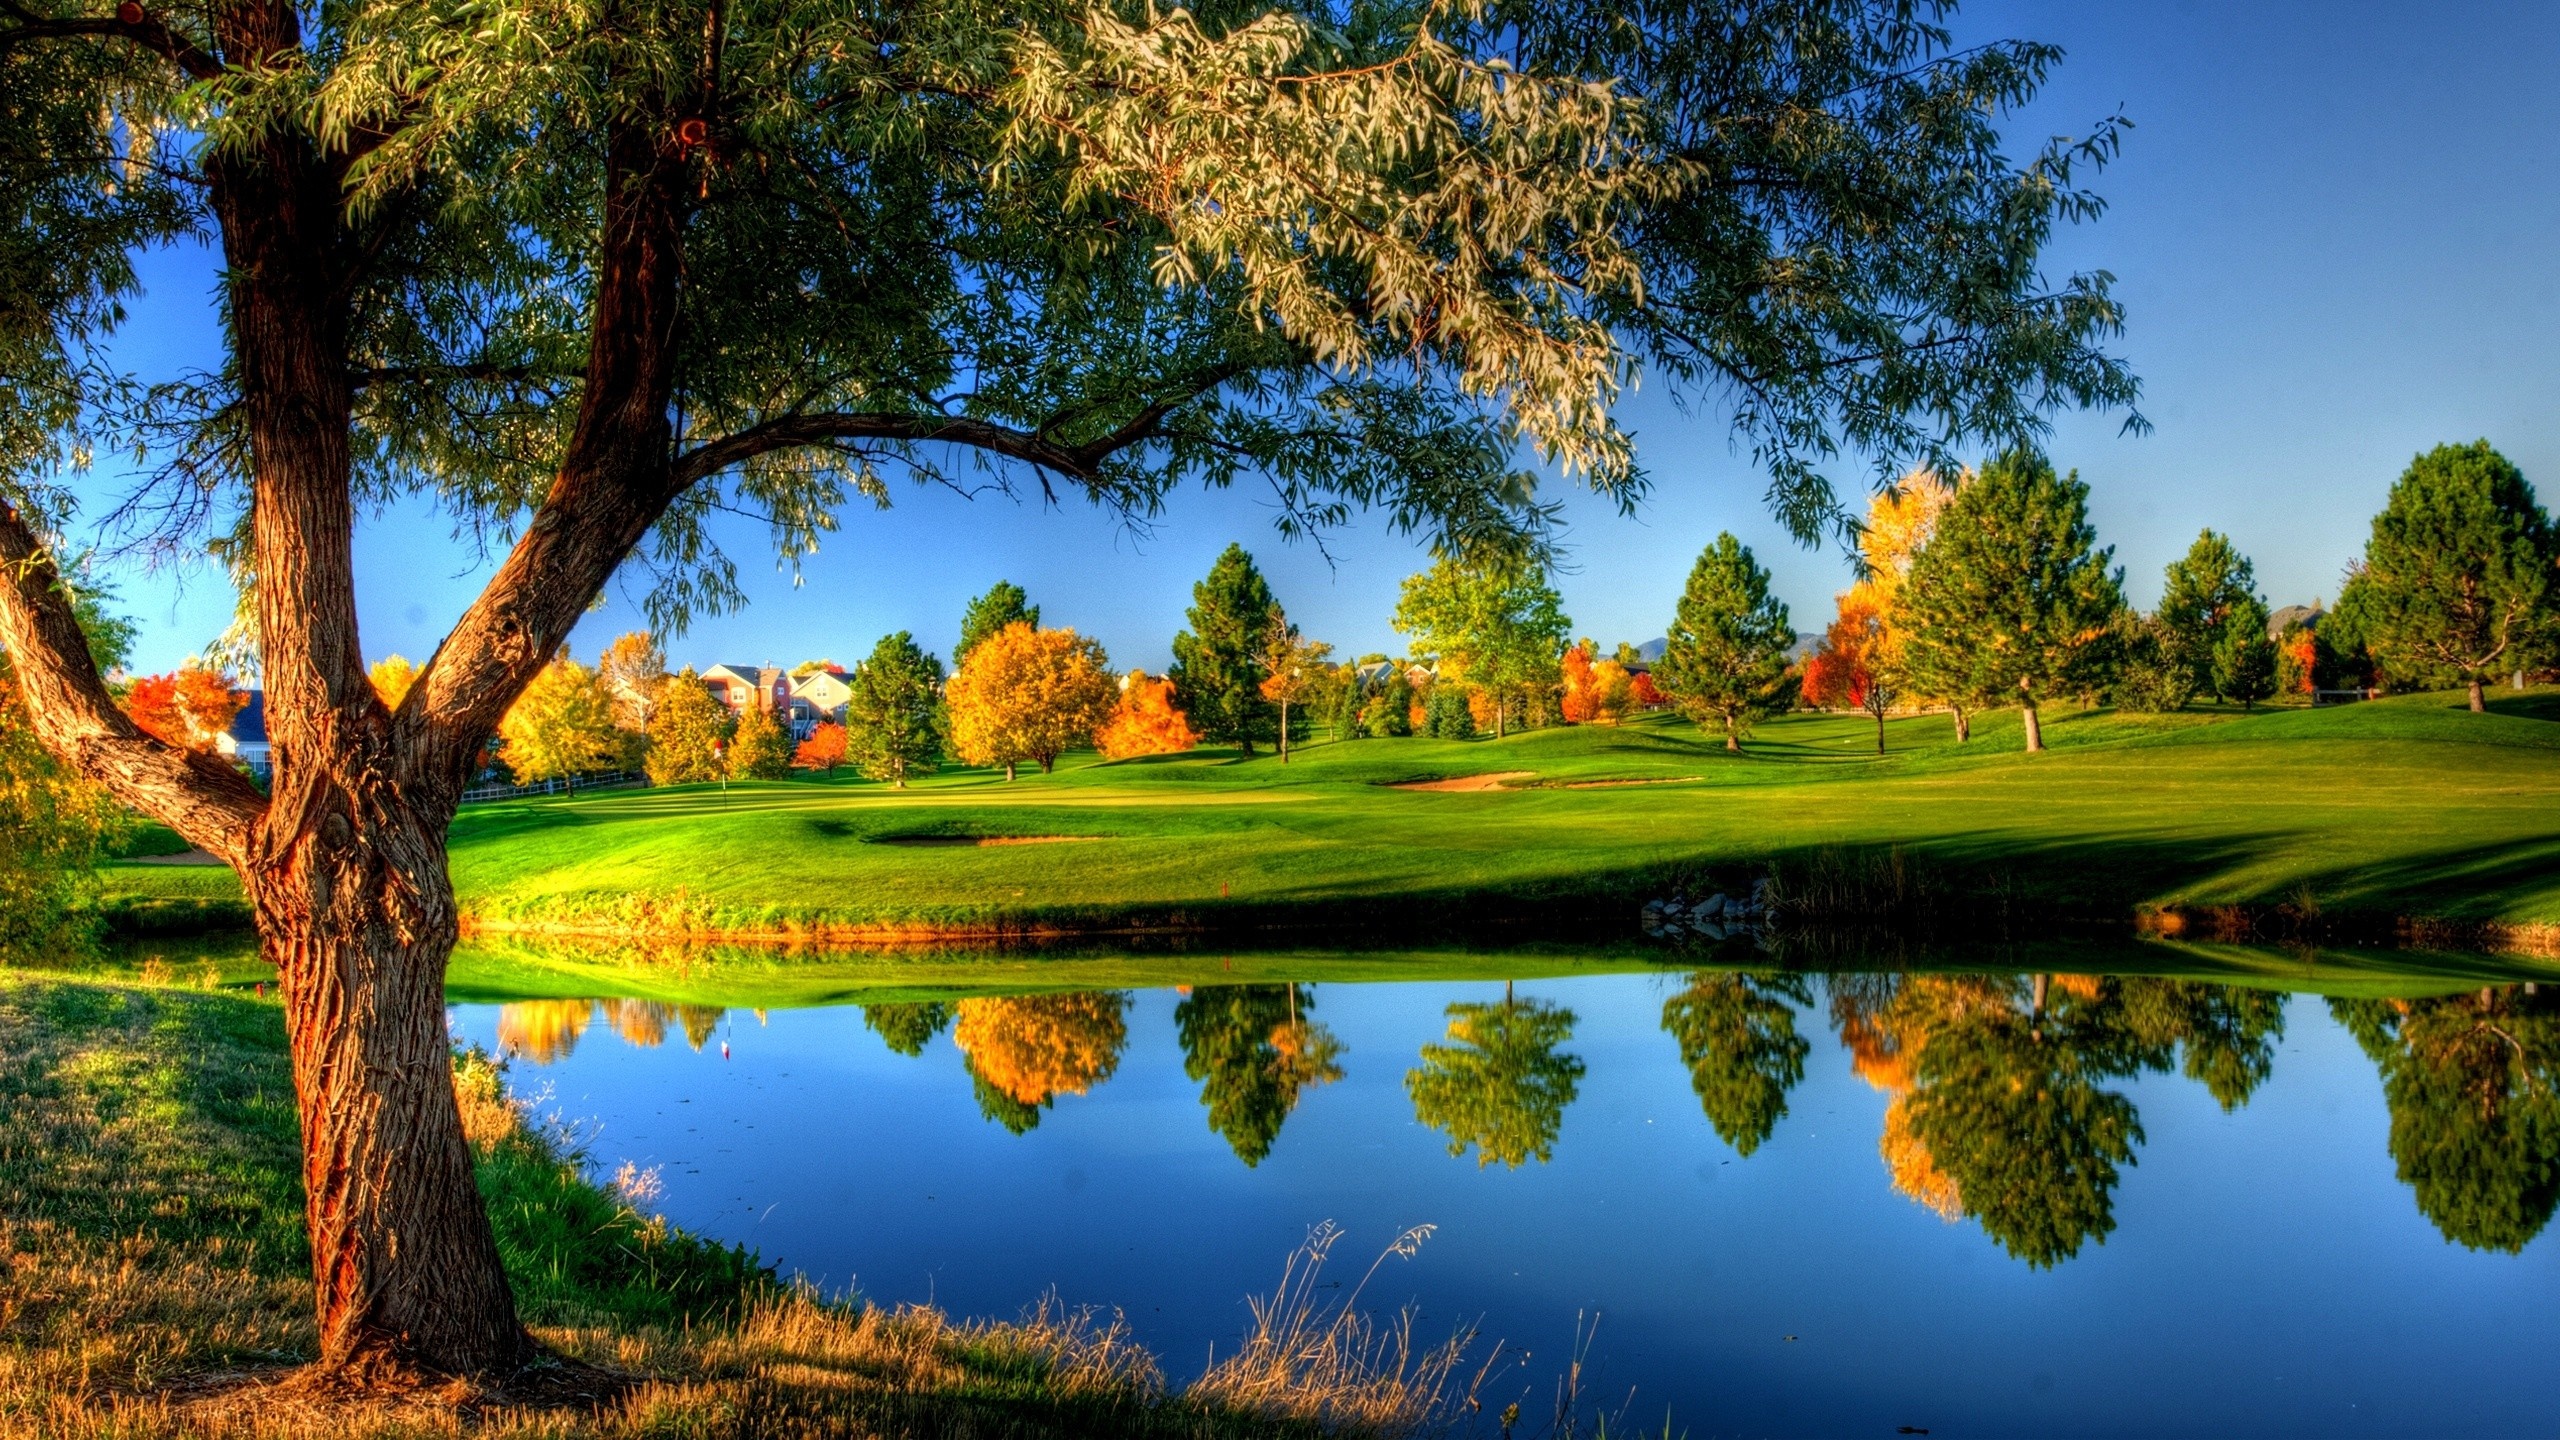 Golf Course: Landscape, Fall, Water, Nature, Reflection, Grass, River, Trees, Autumn, Meadow, Sport venue. 2560x1440 HD Background.